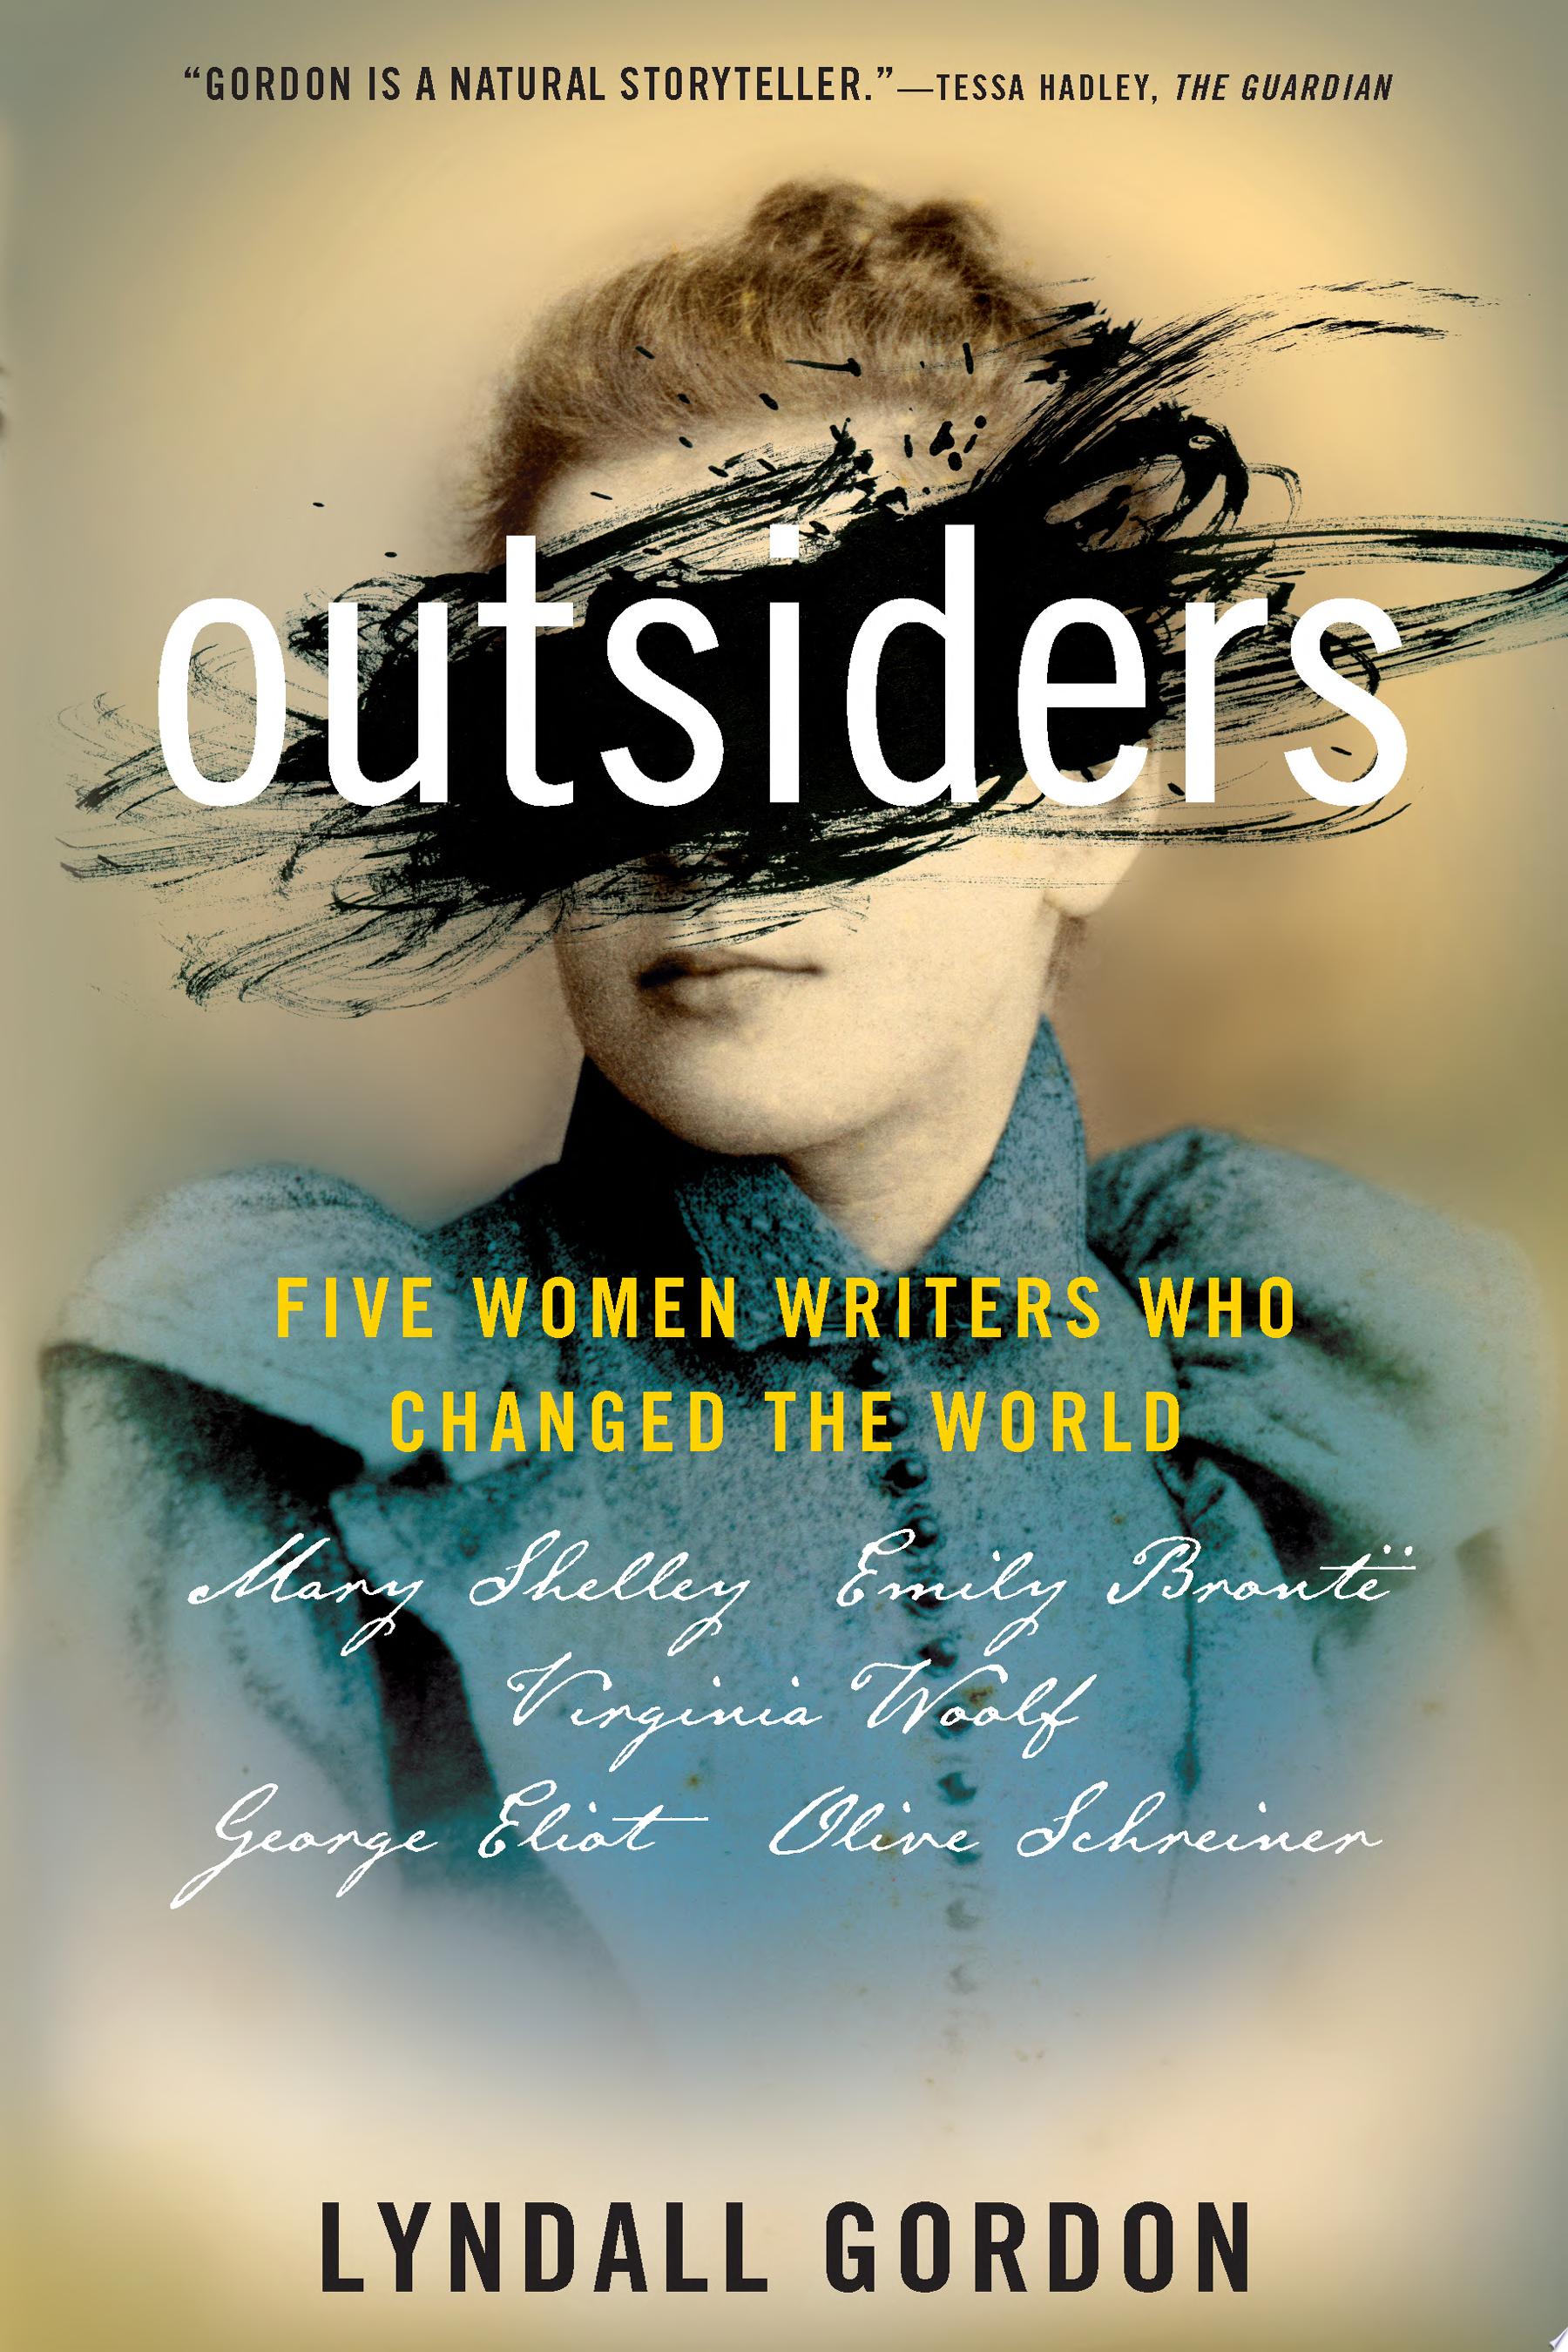 Image for "Outsiders"